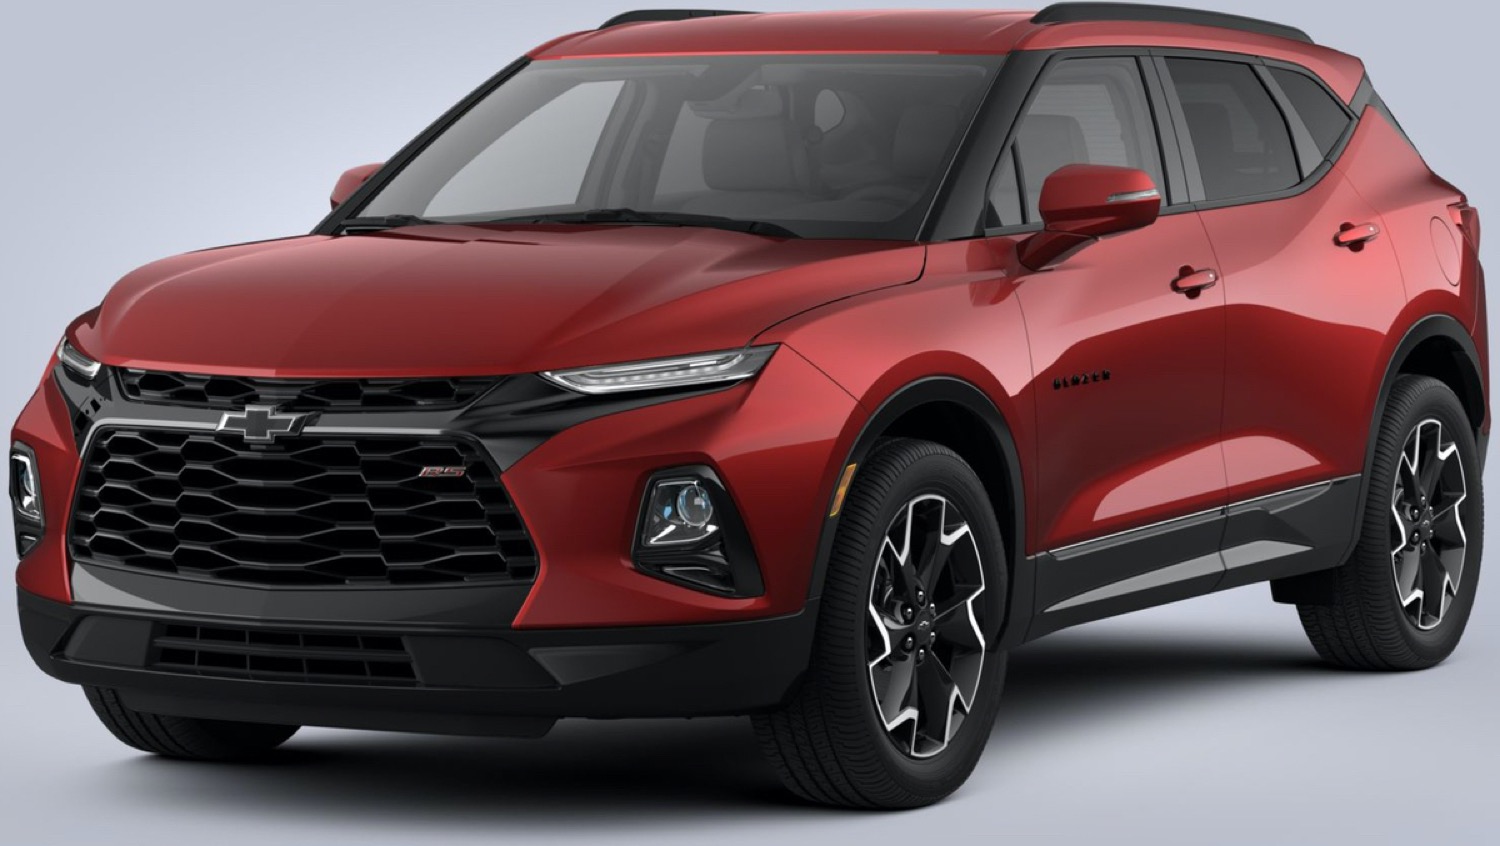 2021 Chevrolet Blazer Gets New Cherry Red Tintcoat Color GM Authority